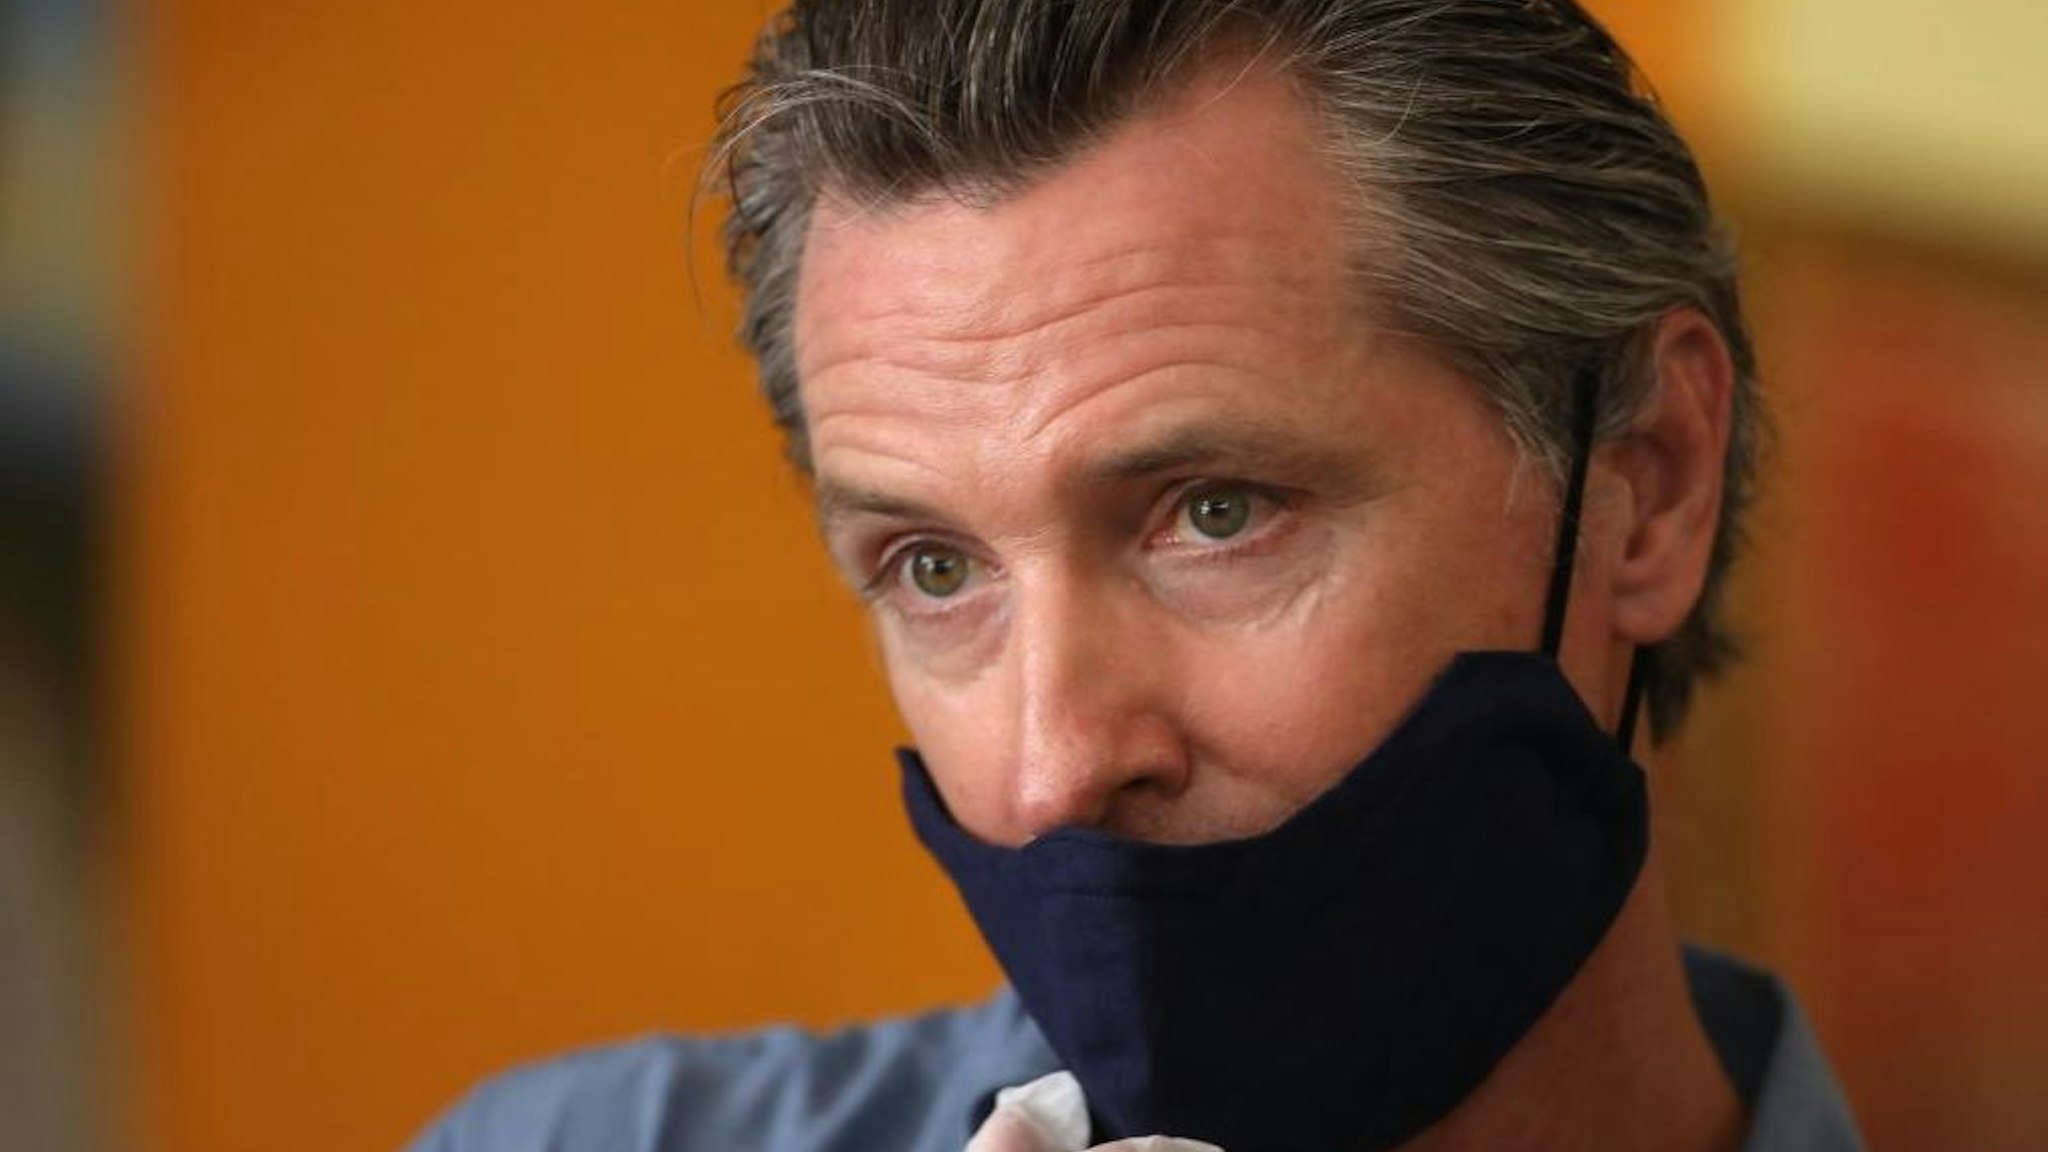 LOS ANGELES, CA - JUNE 03, 2020 - - California Governor Gavin Newsom is interviewed while visiting the Hot and Cool Cafe in Leimert Park after several days of protest in Los Angeles on June 3, 2020.